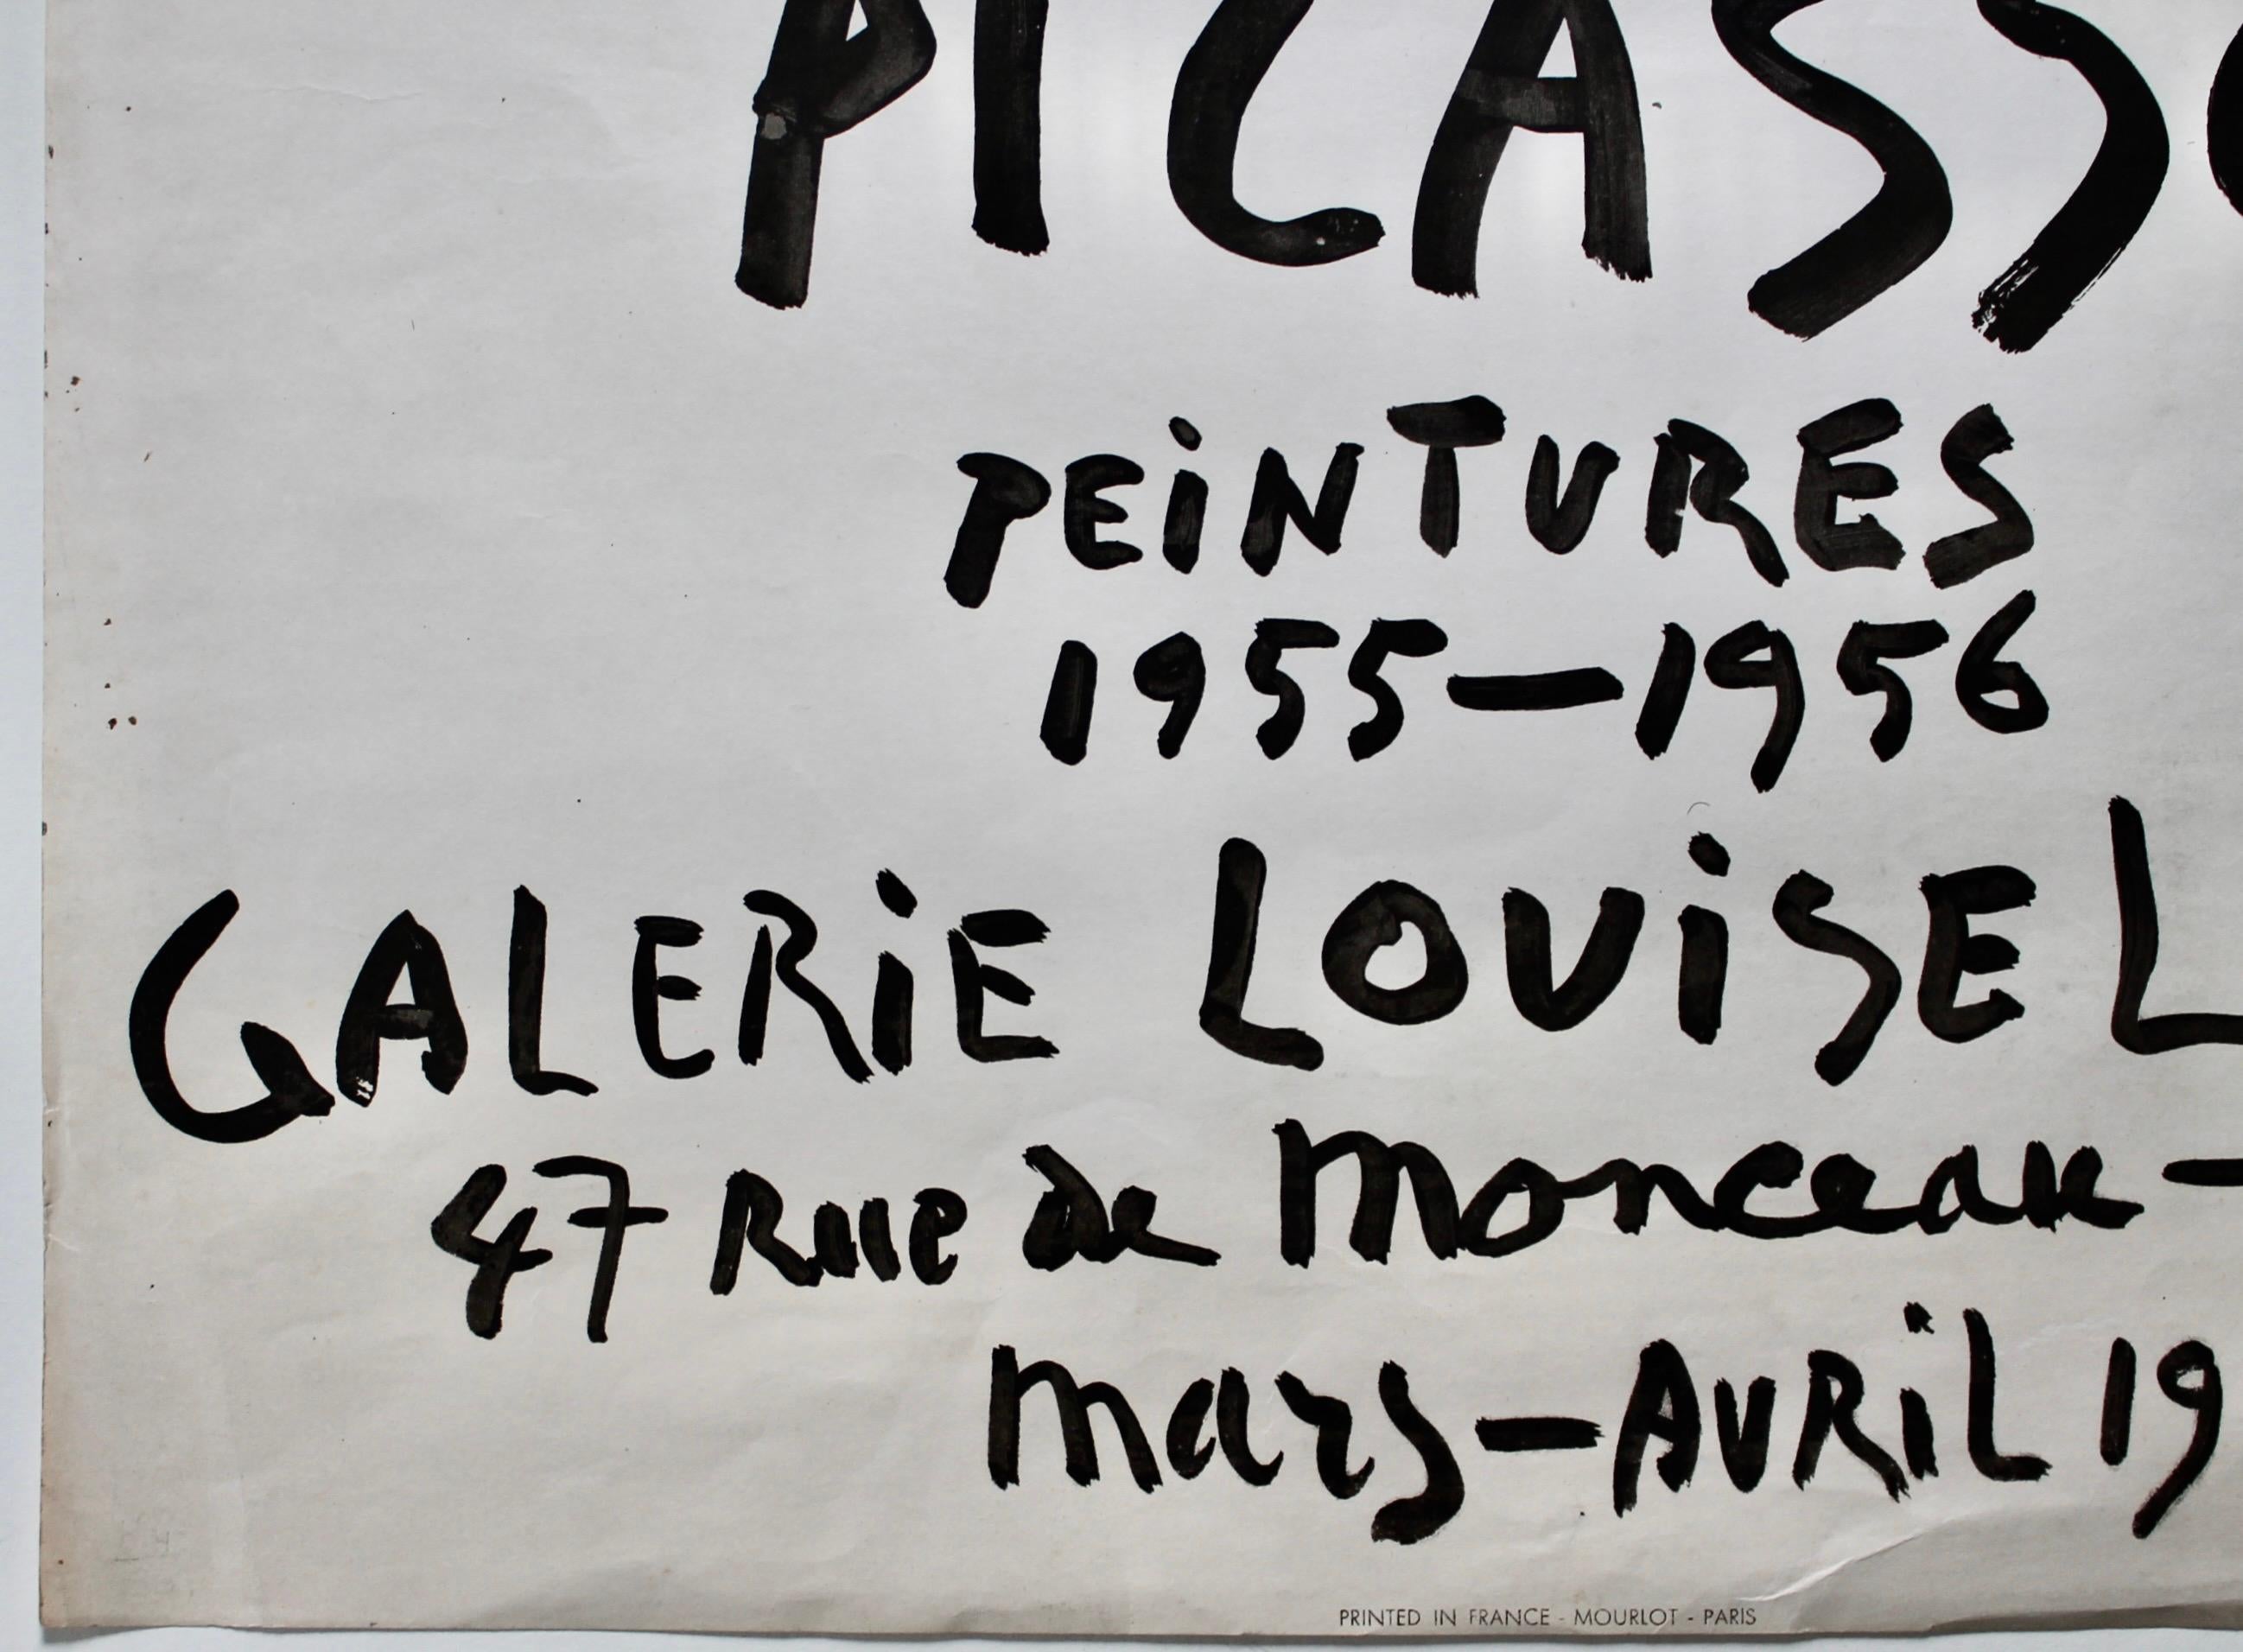 French Original Pablo Picasso Poster, 1957, Galerie Louise Leiris For Sale